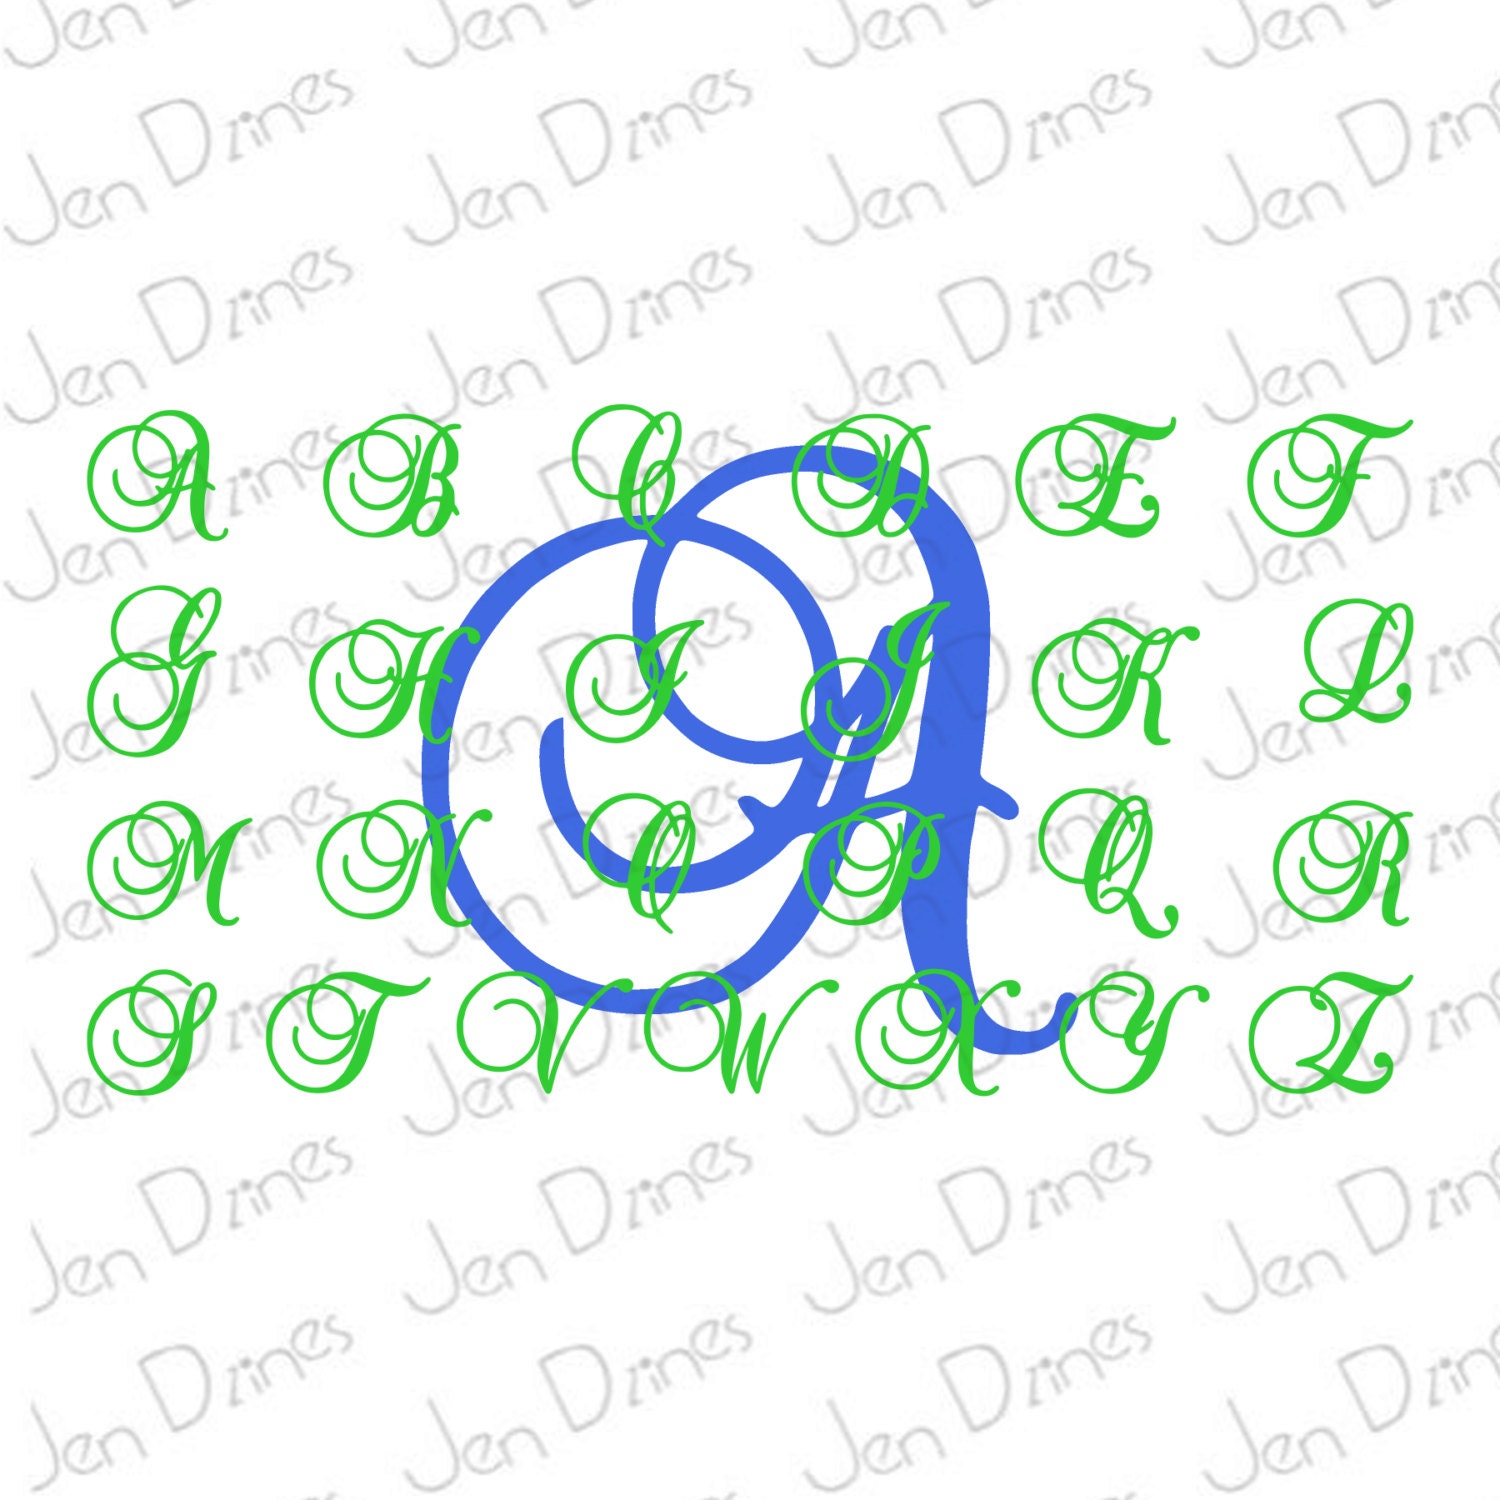 Download Single Letter Monogram SVG DXF EPS Initial Monogram by JenDzines